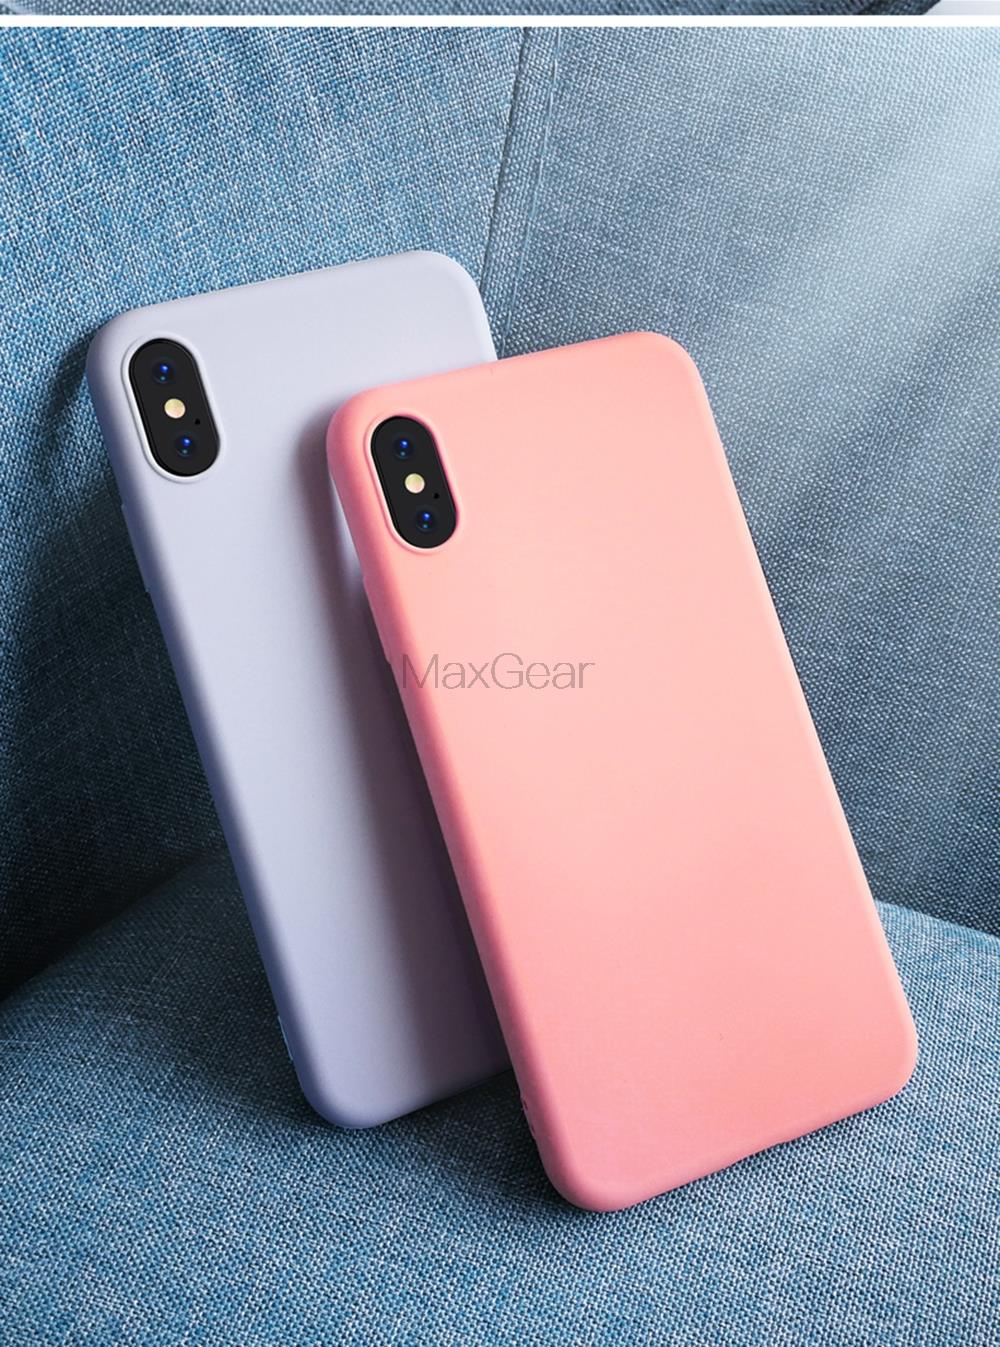 Thin Soft Case For iPhone 7 8 6 6s Plus 4 5S SE 2 Original Liquid Silicone Cover Candy For iPhone X Xs 11 Pro Max XR